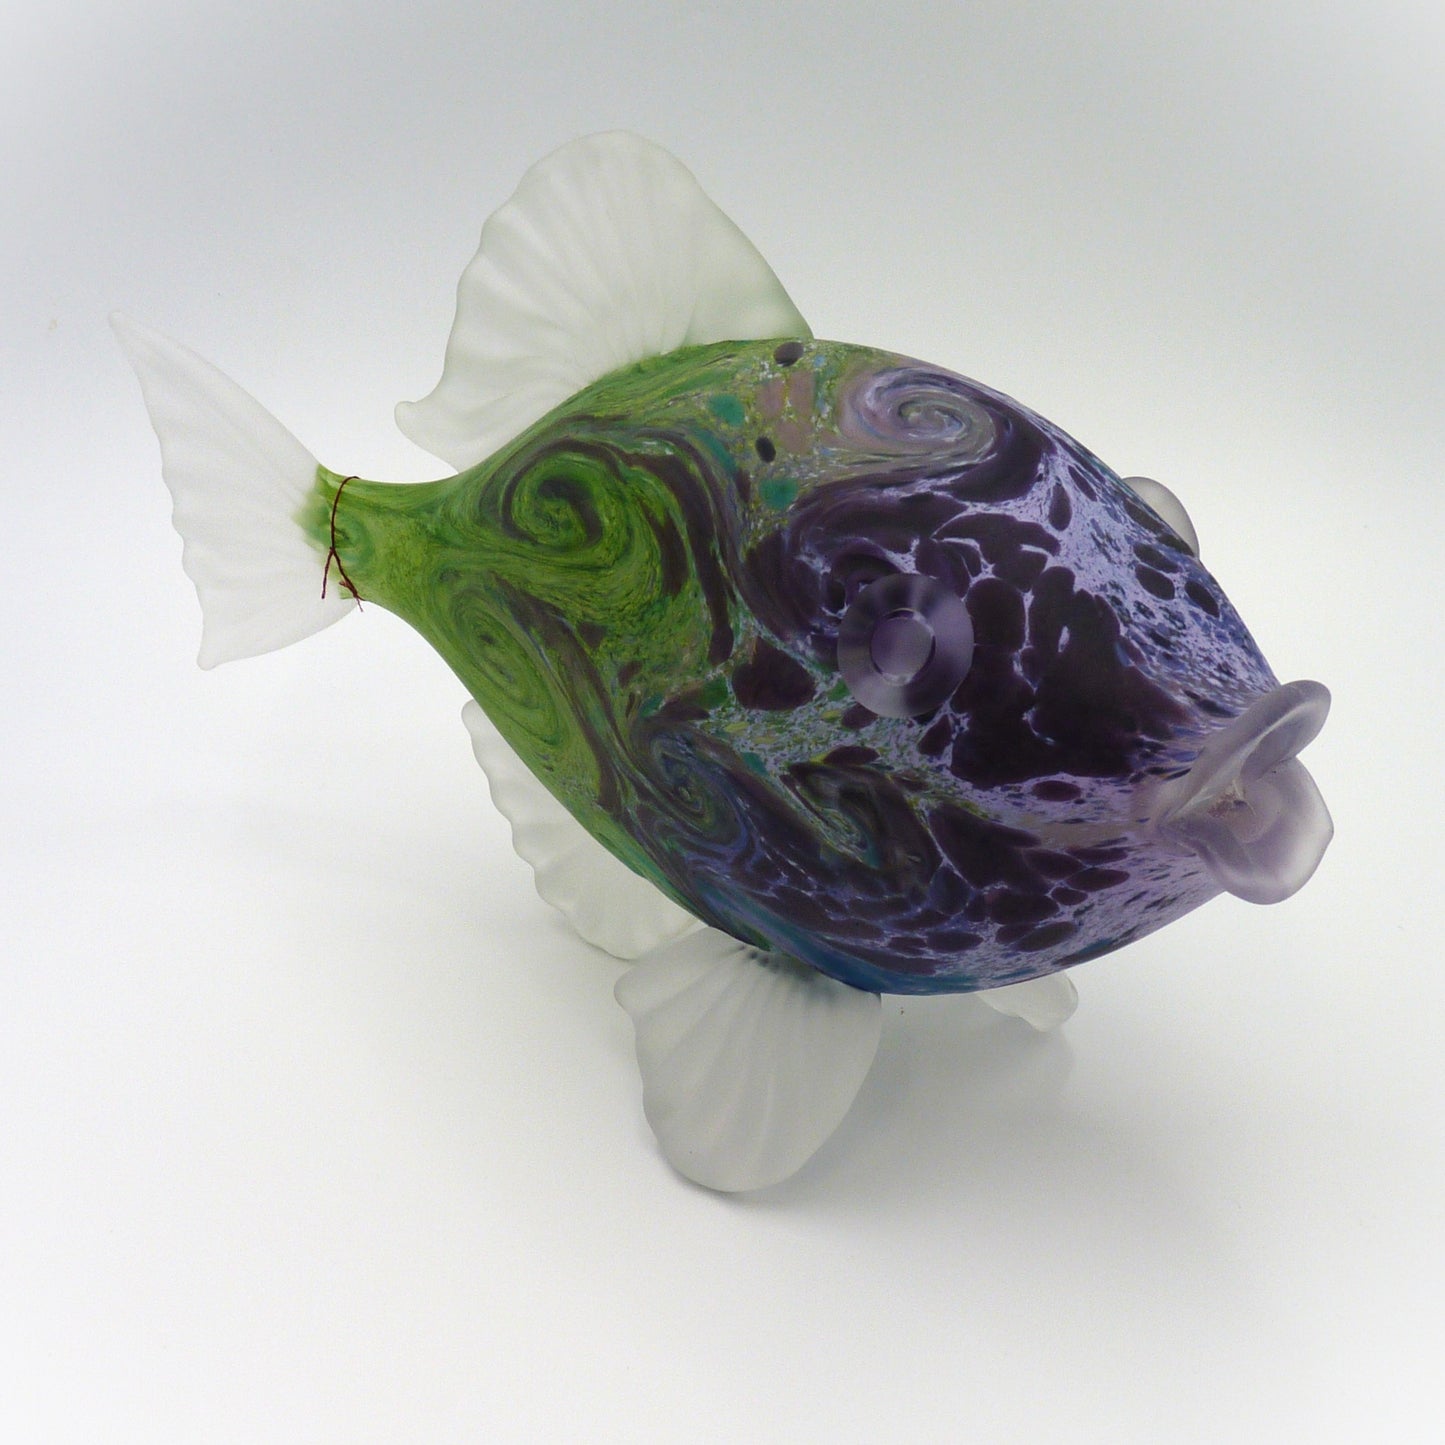 Green and Violet Starry Fish